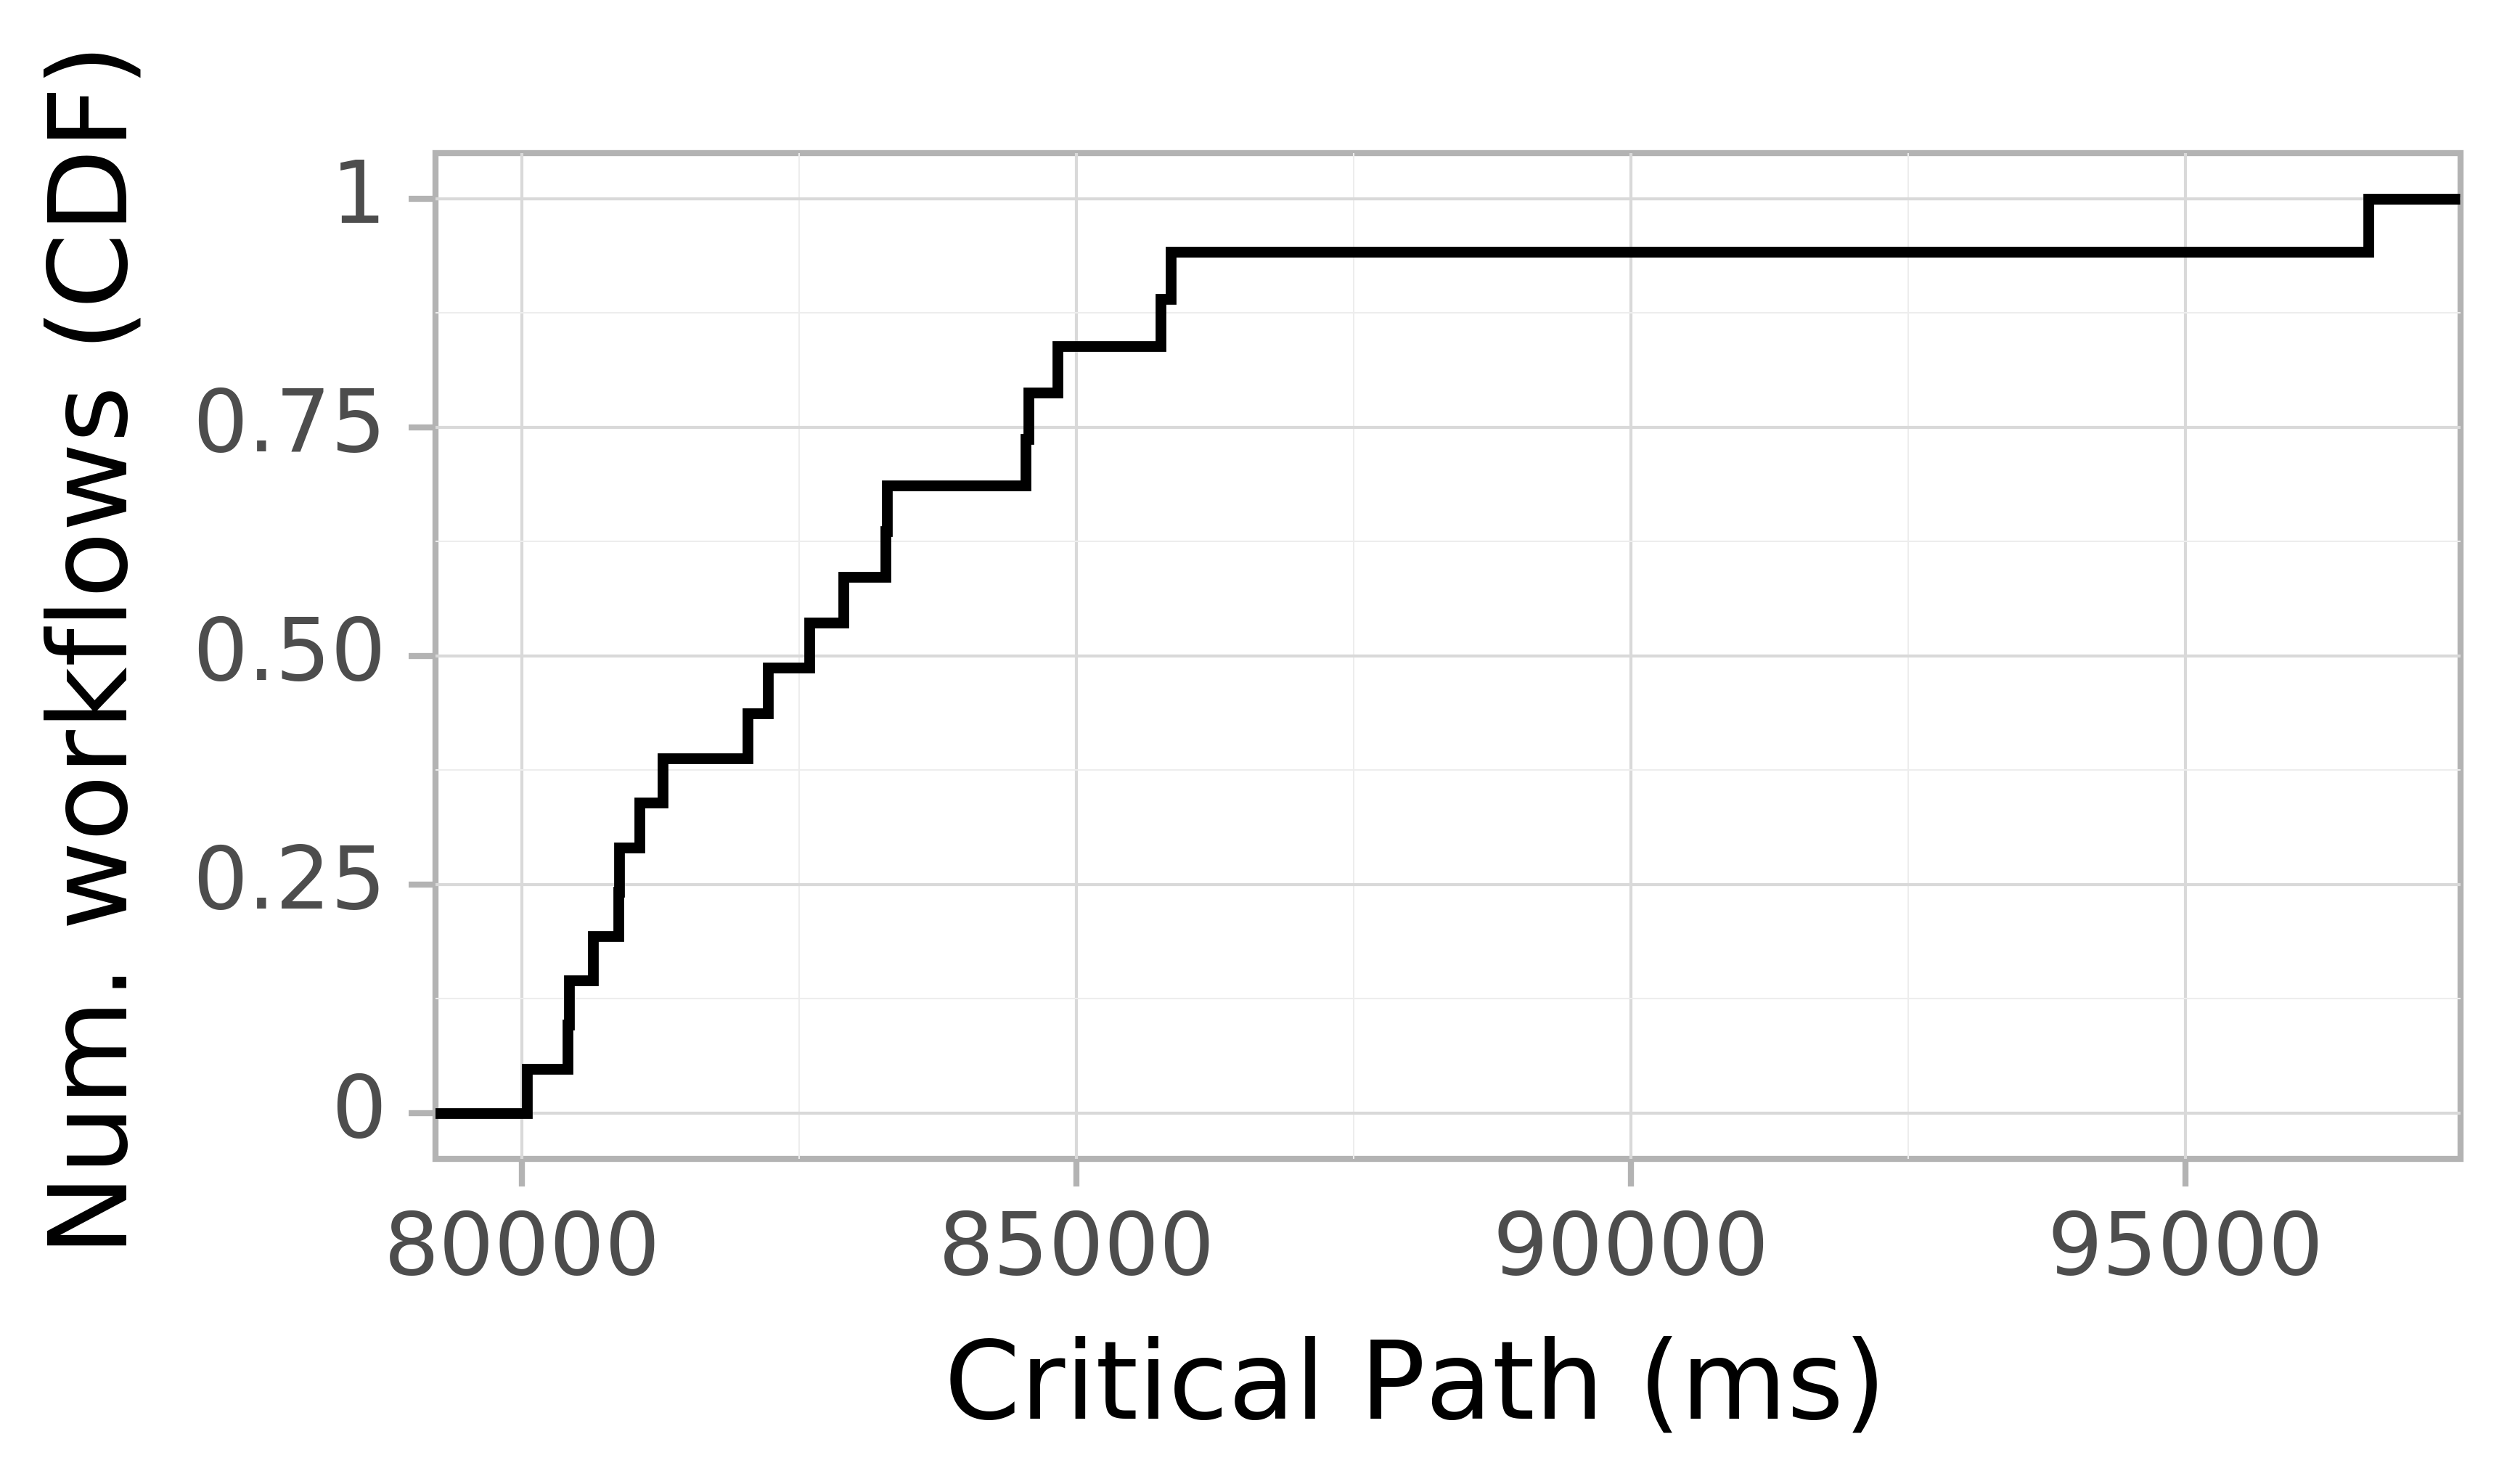 Job runtime CDF graph for the askalon-new_ee47 trace.